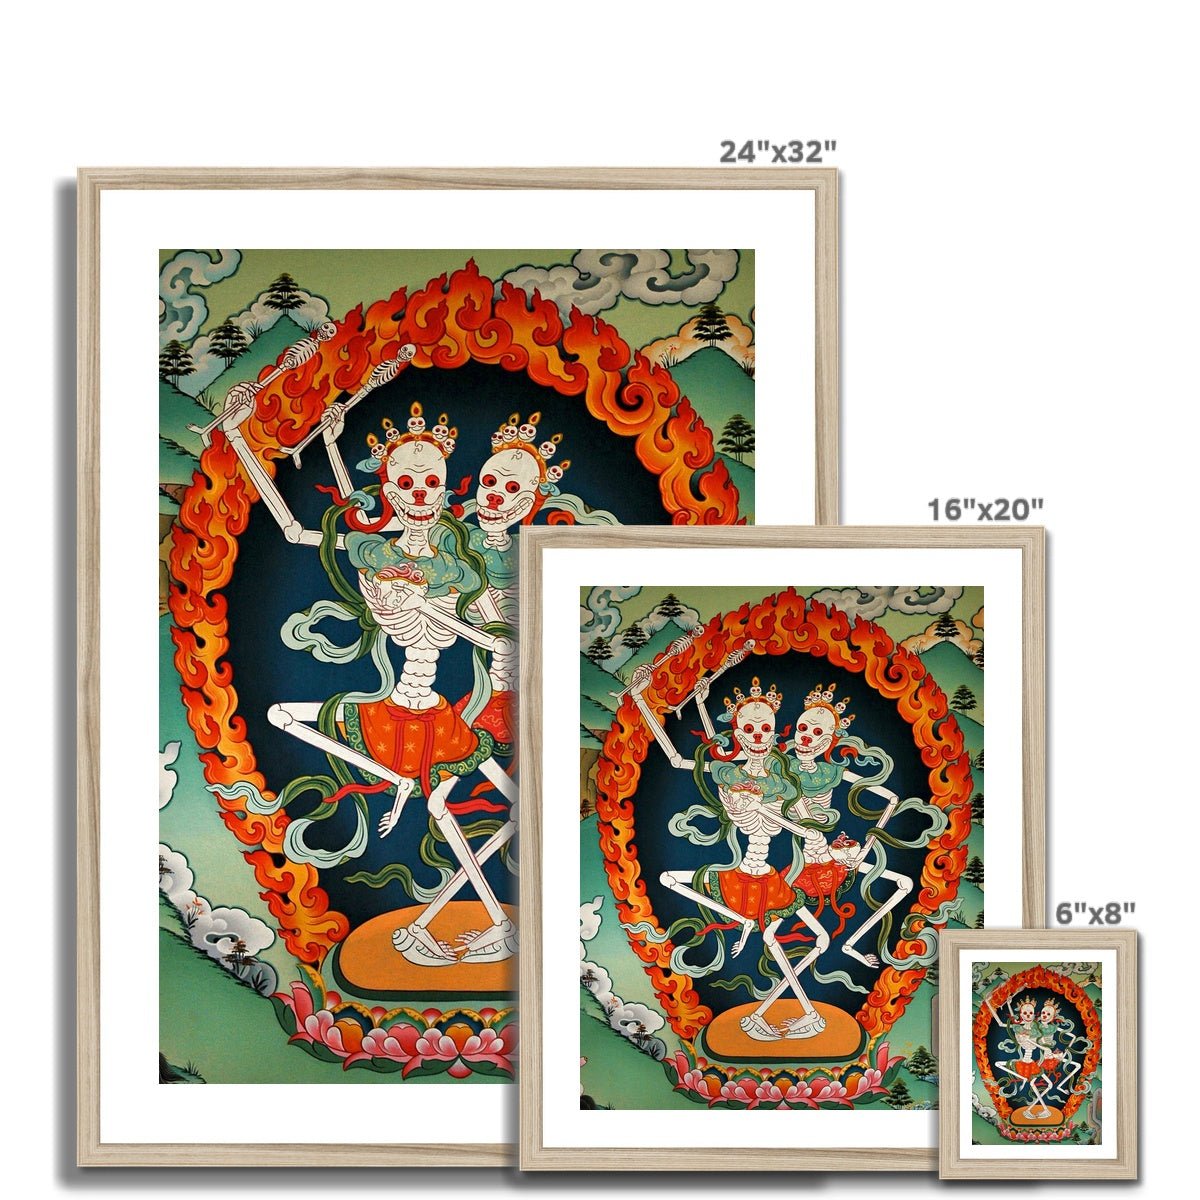 Framed Print Citipati, Tibetan Protector, Thangka, Skeleton Lord and Lady of the Cemetery Nepal Buddhist Decor Wall Art Framed Art Print